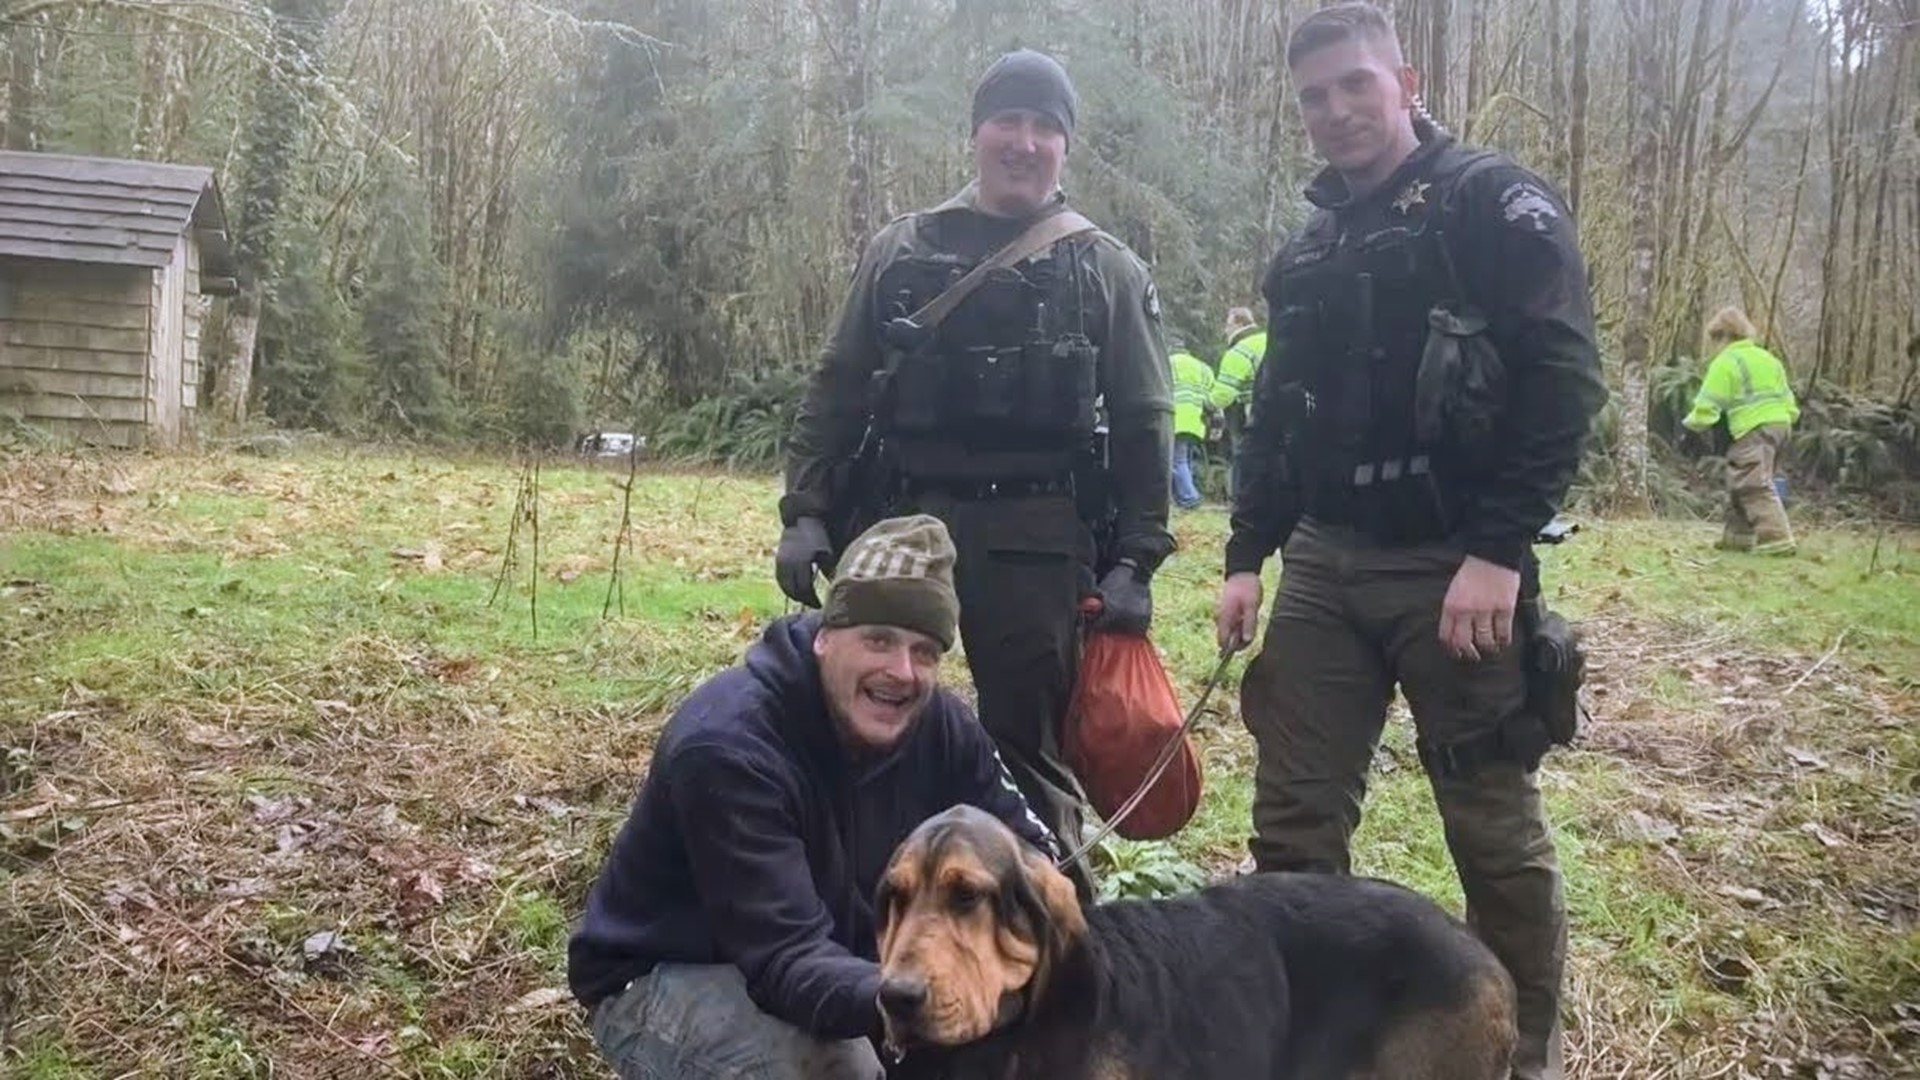 A Kalama man and his dogs are thankful to be safe, after a harrowing rescue in Cowlitz county